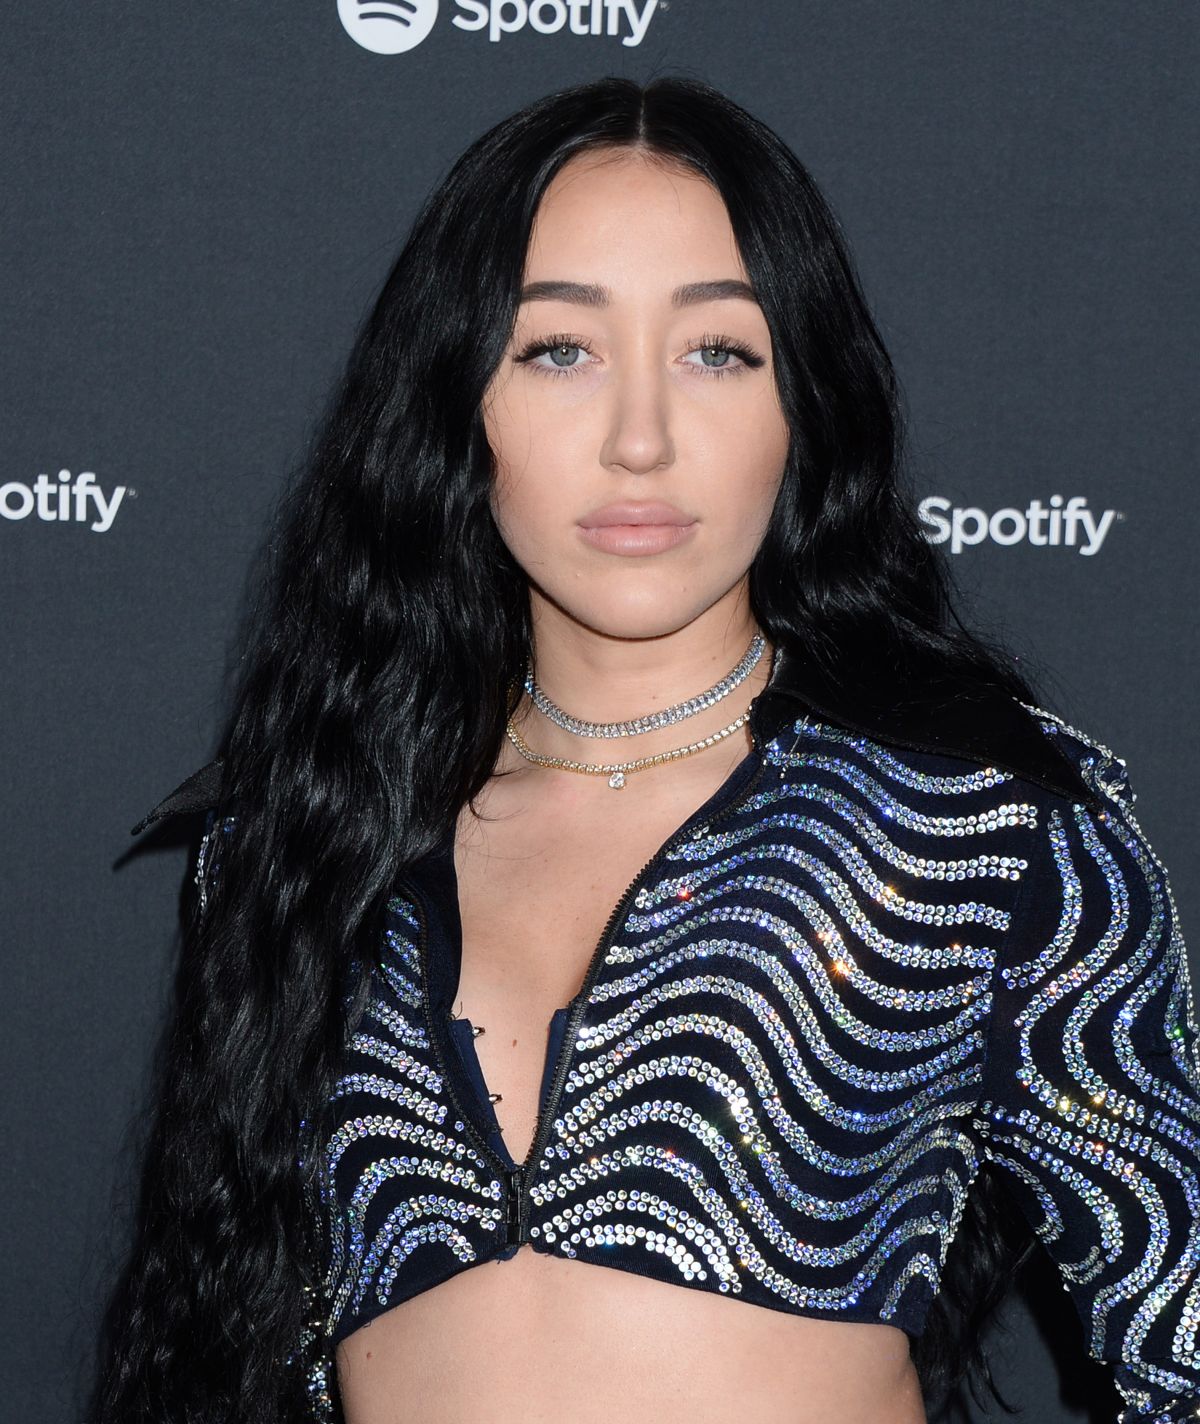 NOAH CYRUS at Spotify Hosts Best New Artist Party in Los Angeles 01/23